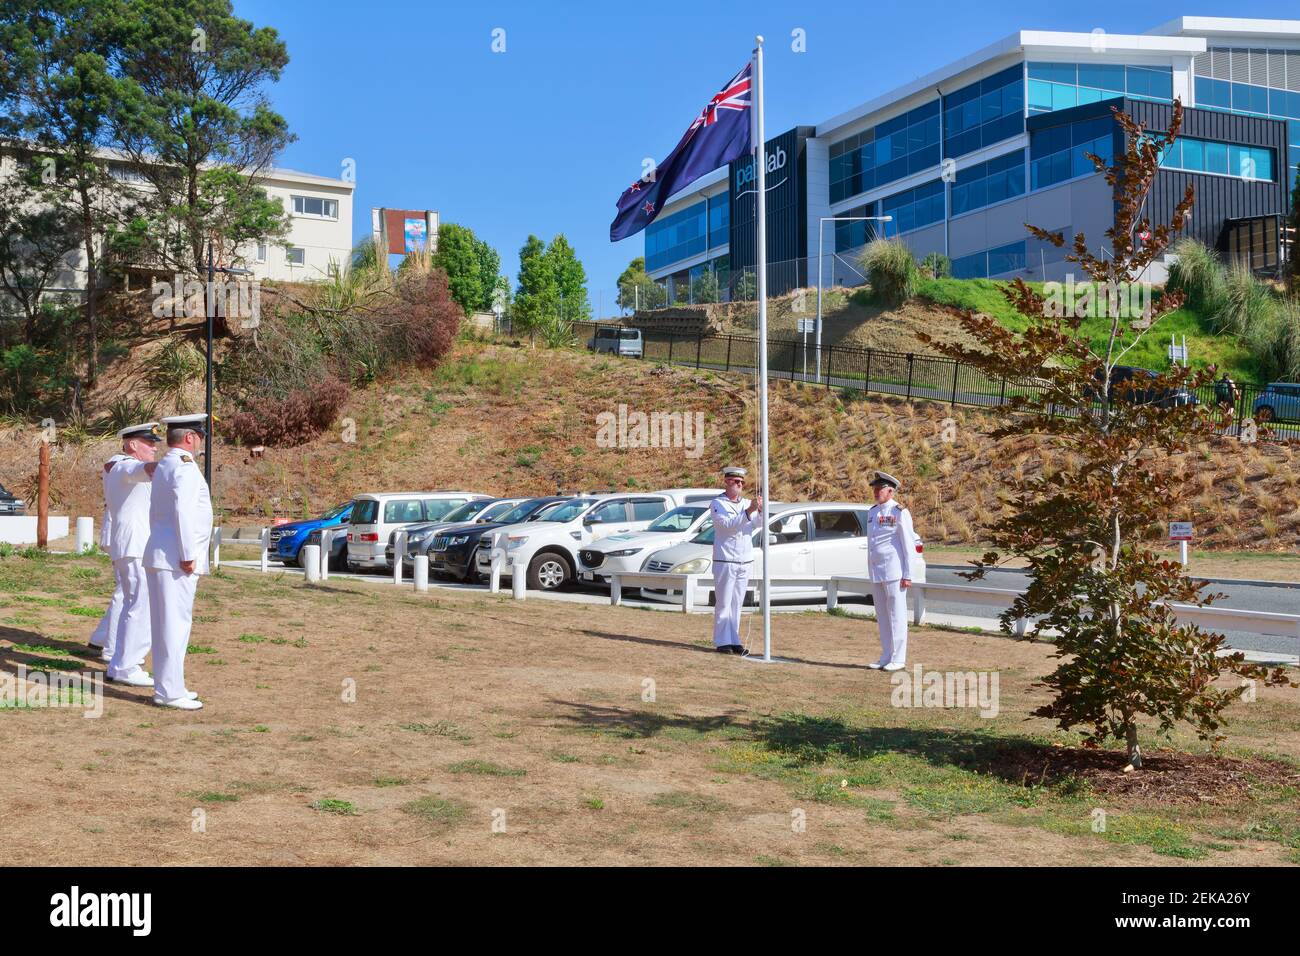 New Zealand Navy personnel ceremonially lowering the NZ flag on Waitangi Day Stock Photo